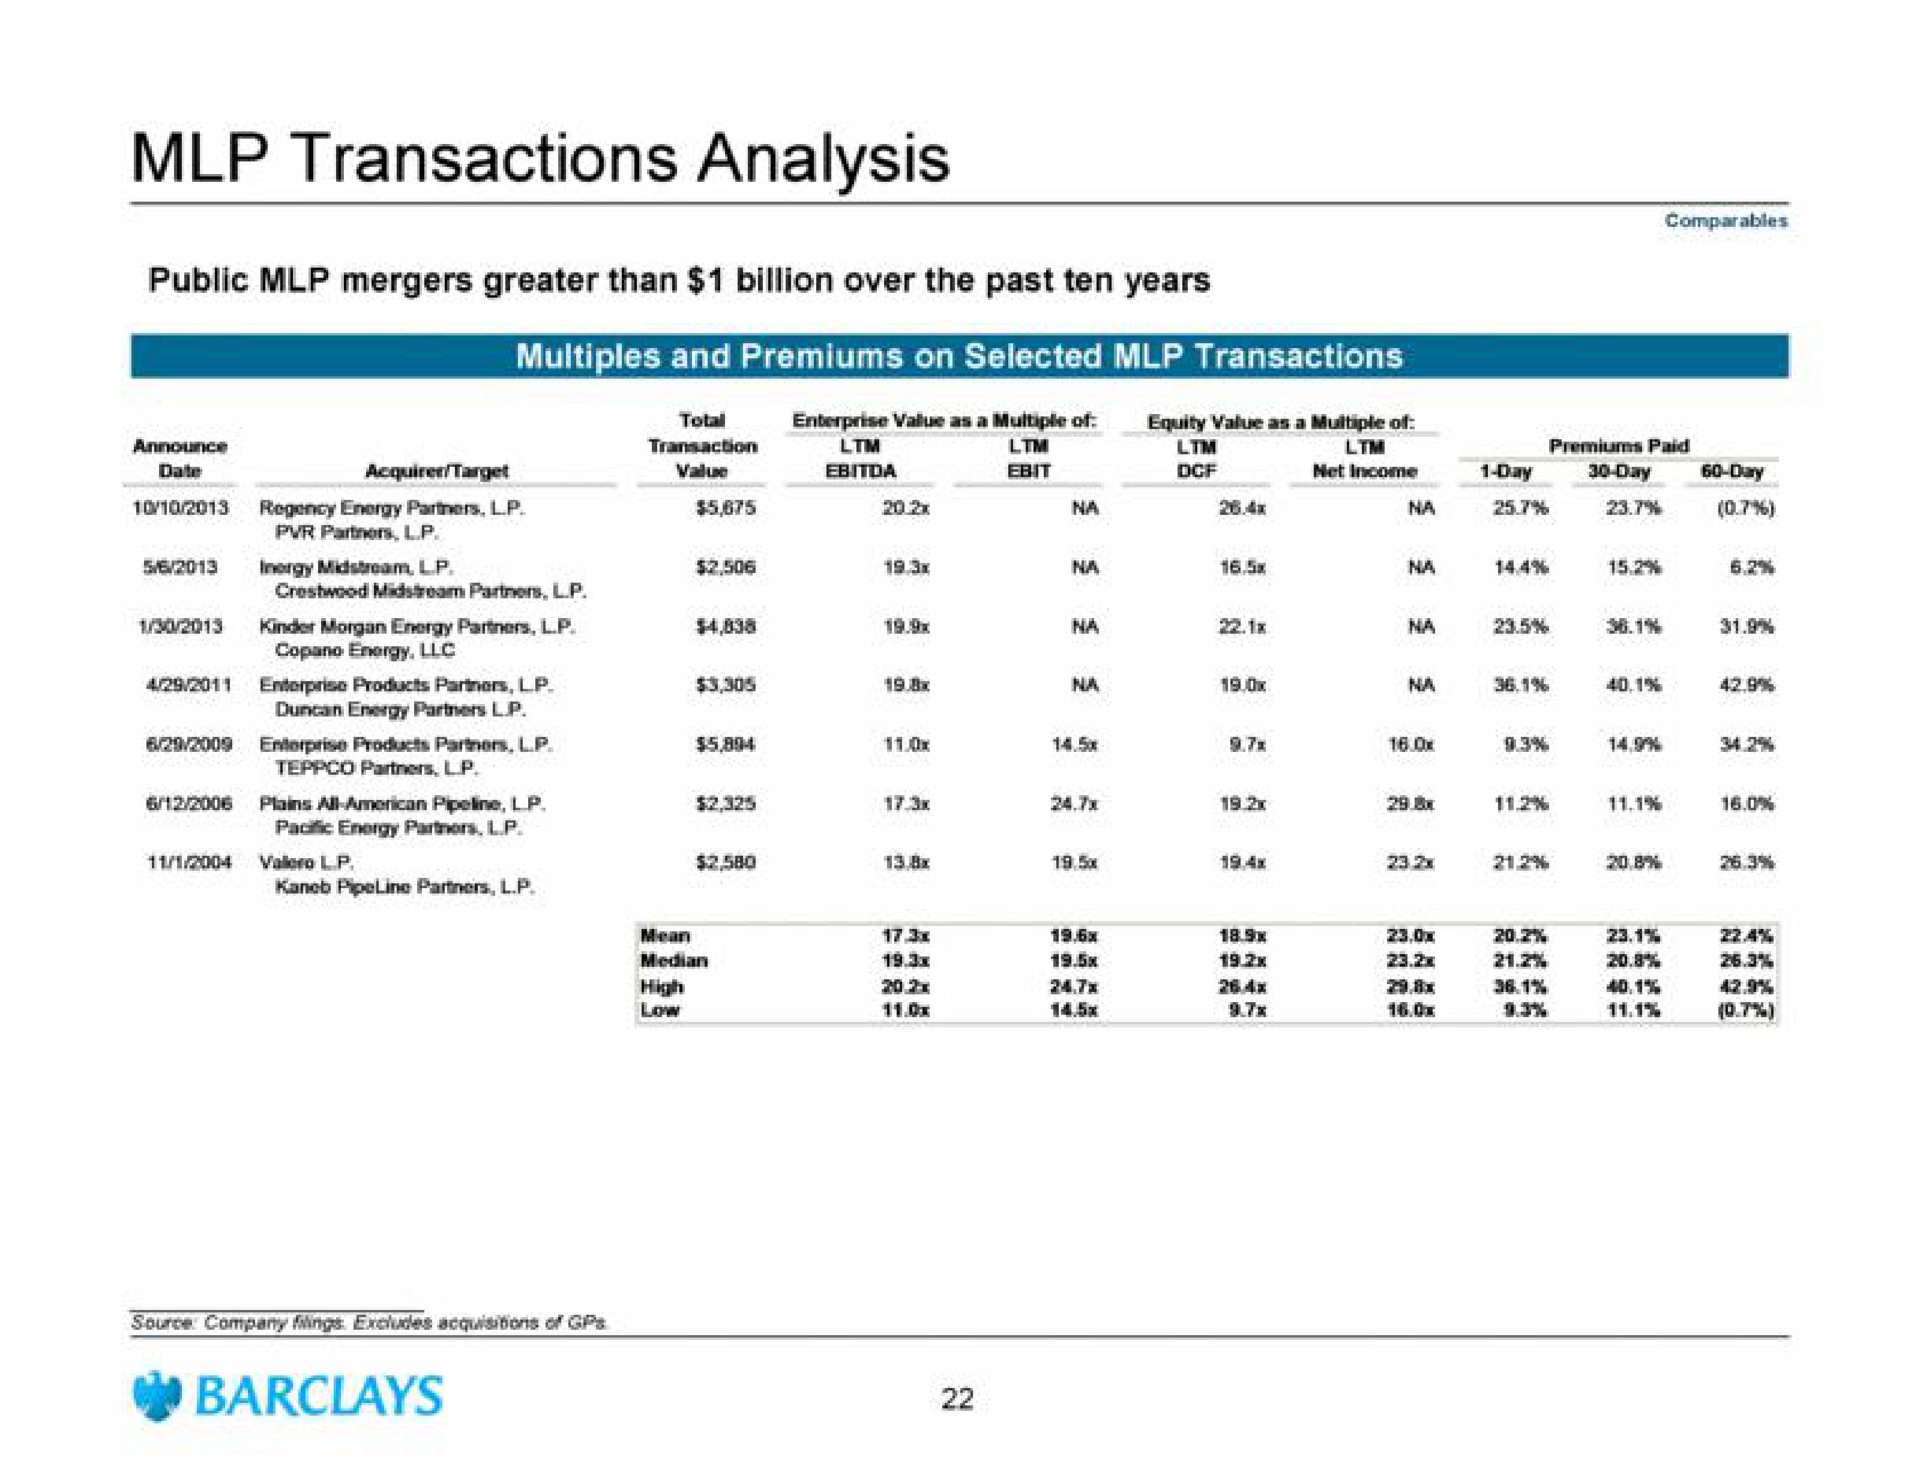 transactions analysis public mergers greater than billion over the past ten years multiples and premiums on selected transactions | Barclays